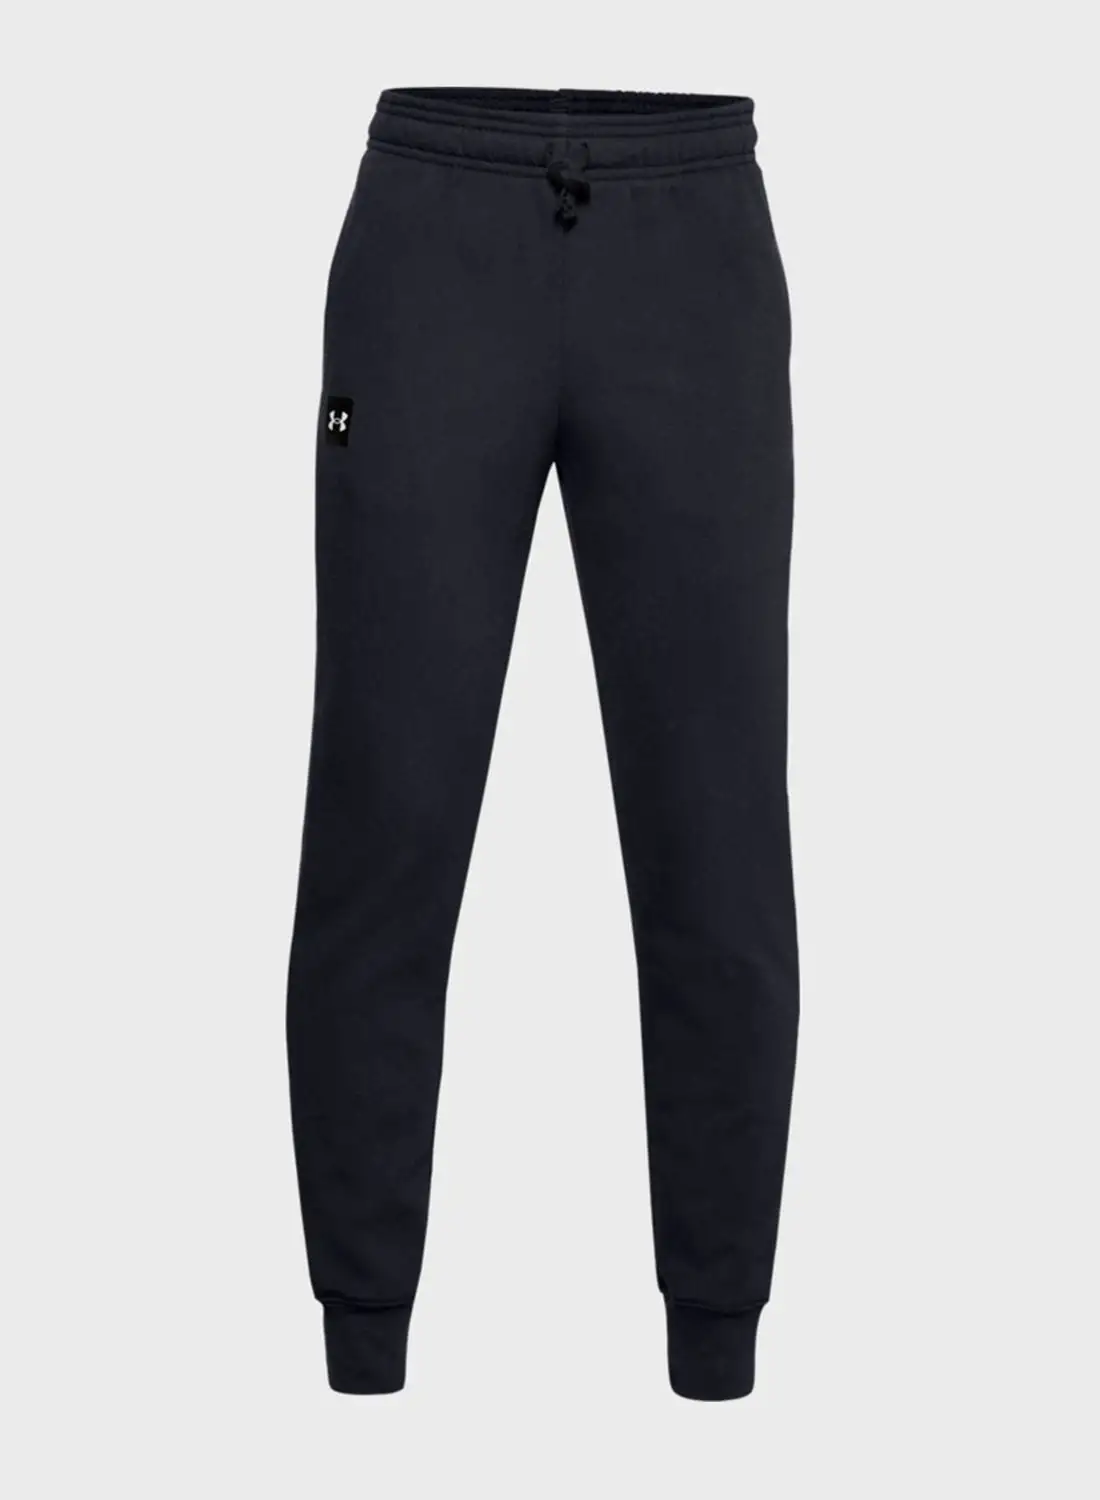 UNDER ARMOUR Youth Rival Fleece Sweatpants